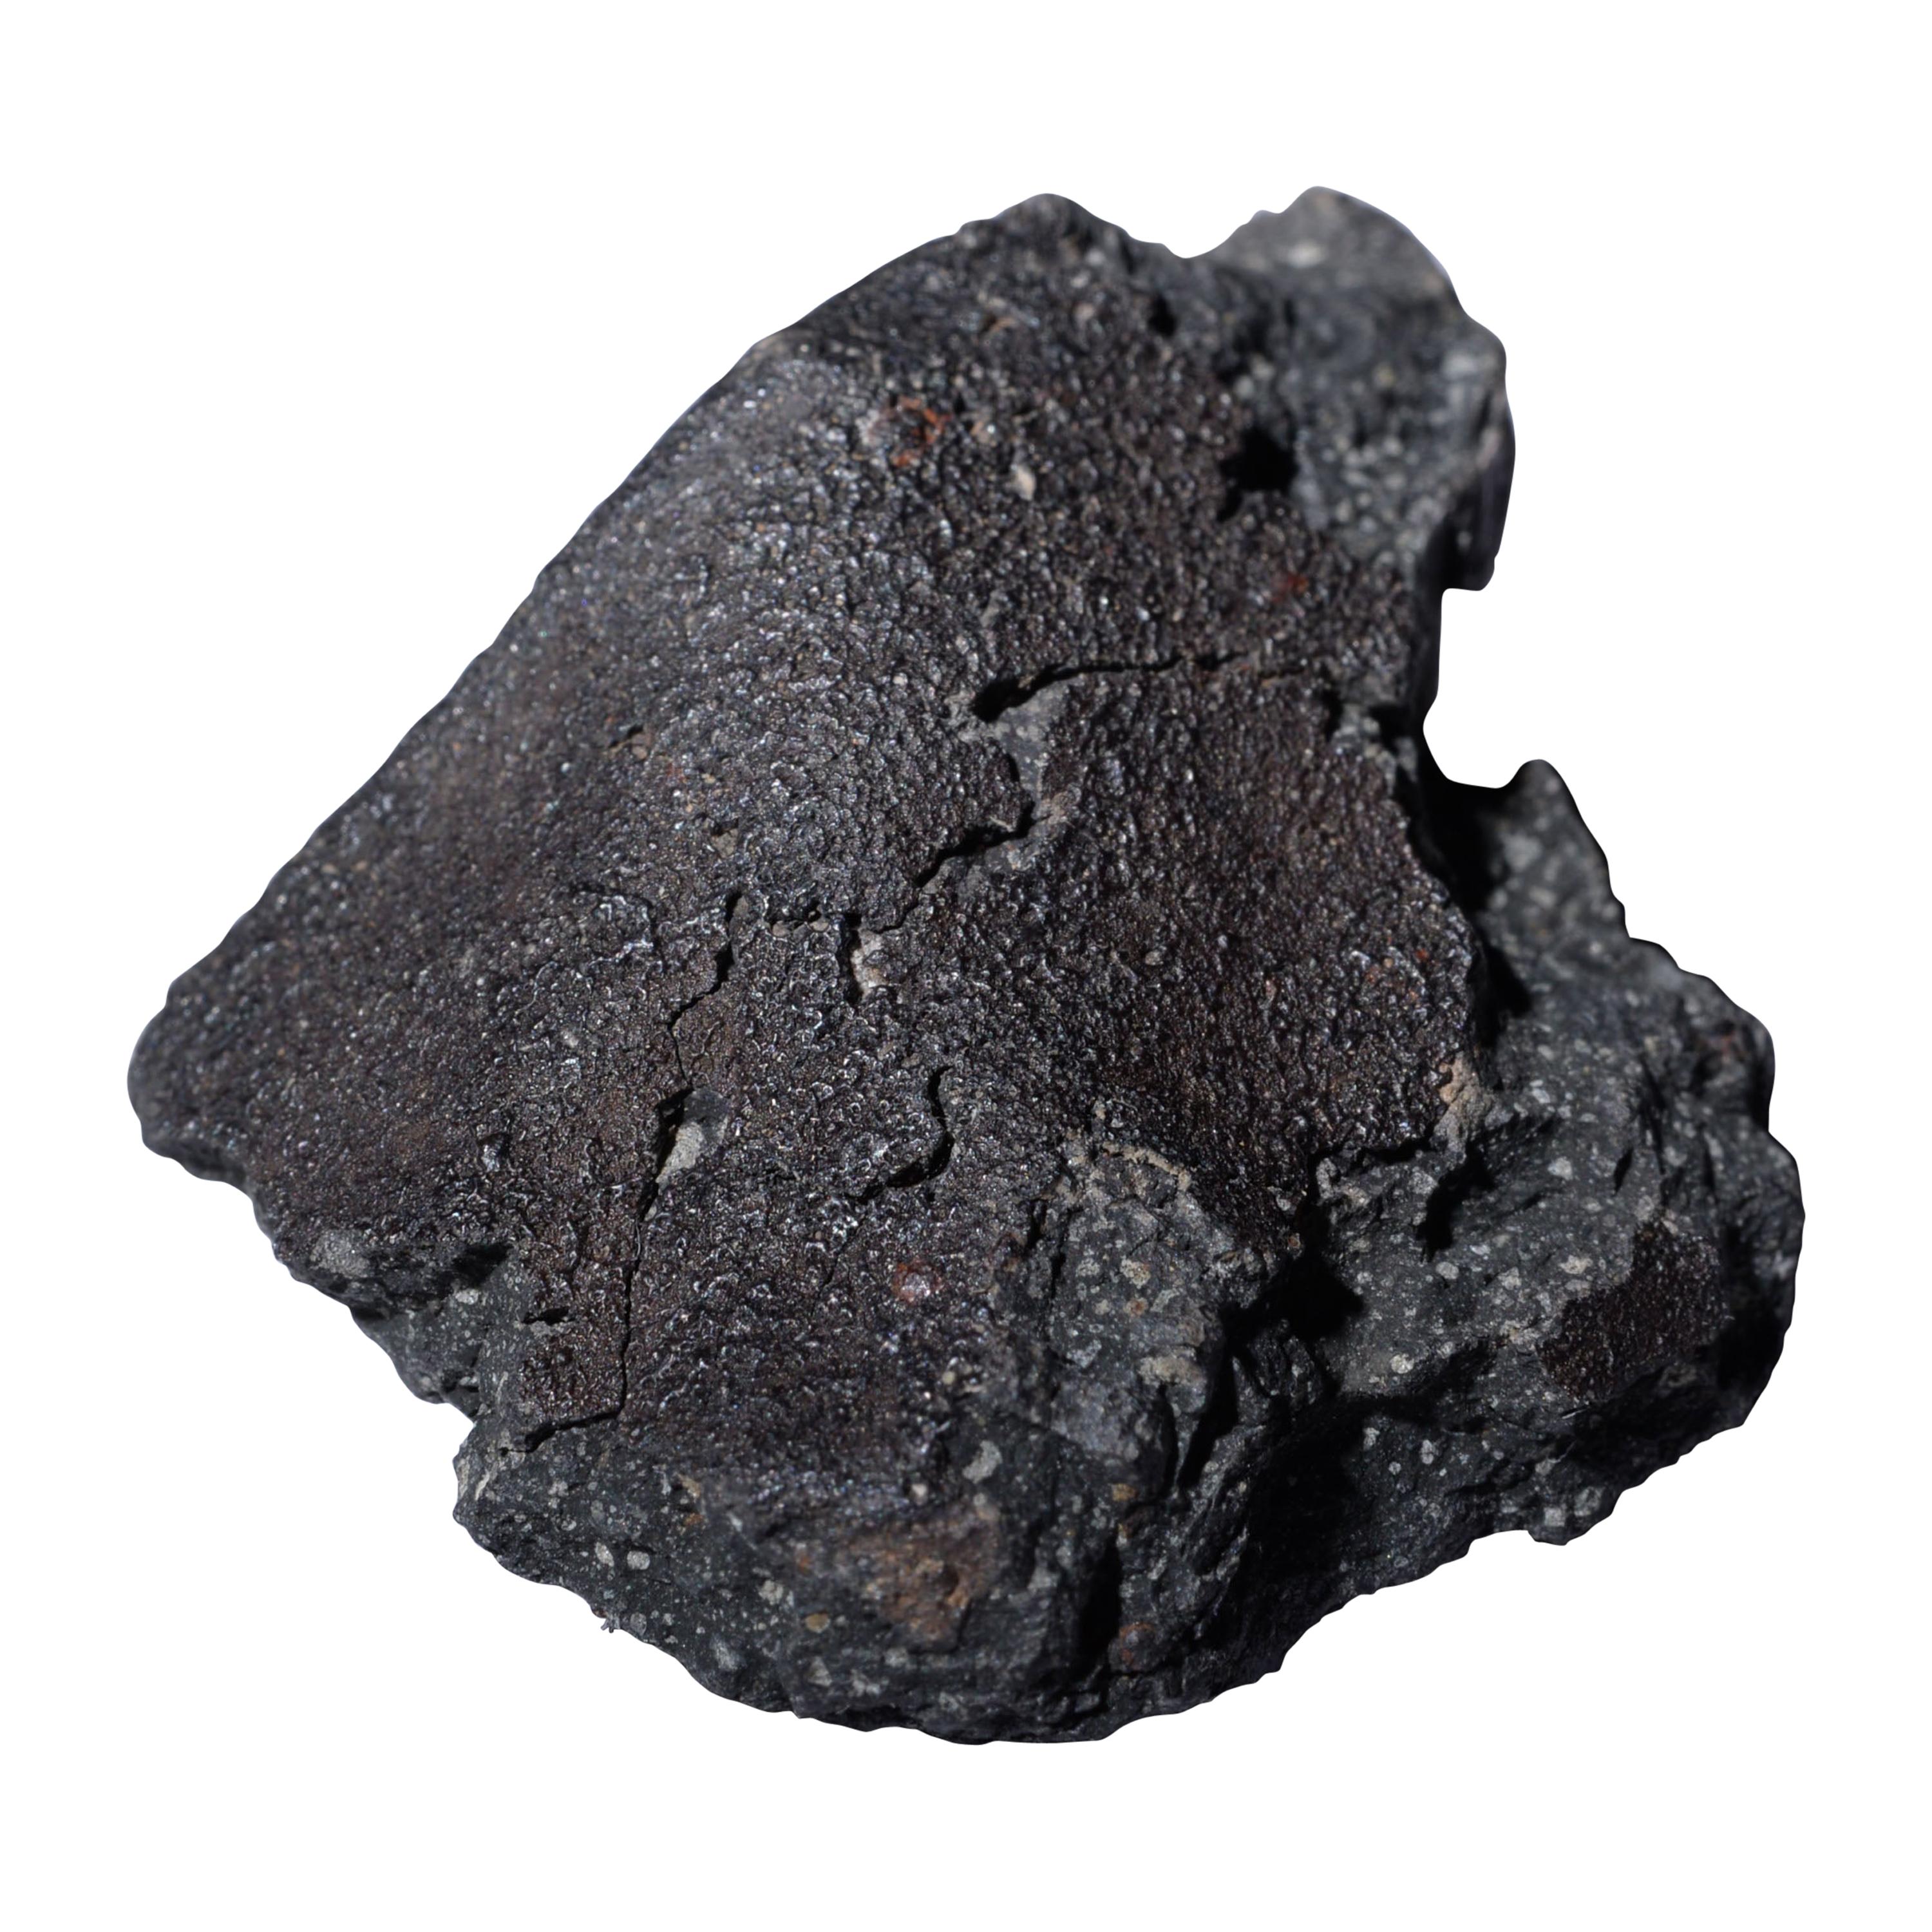 Fragment of the Famous Murchison Meteorite